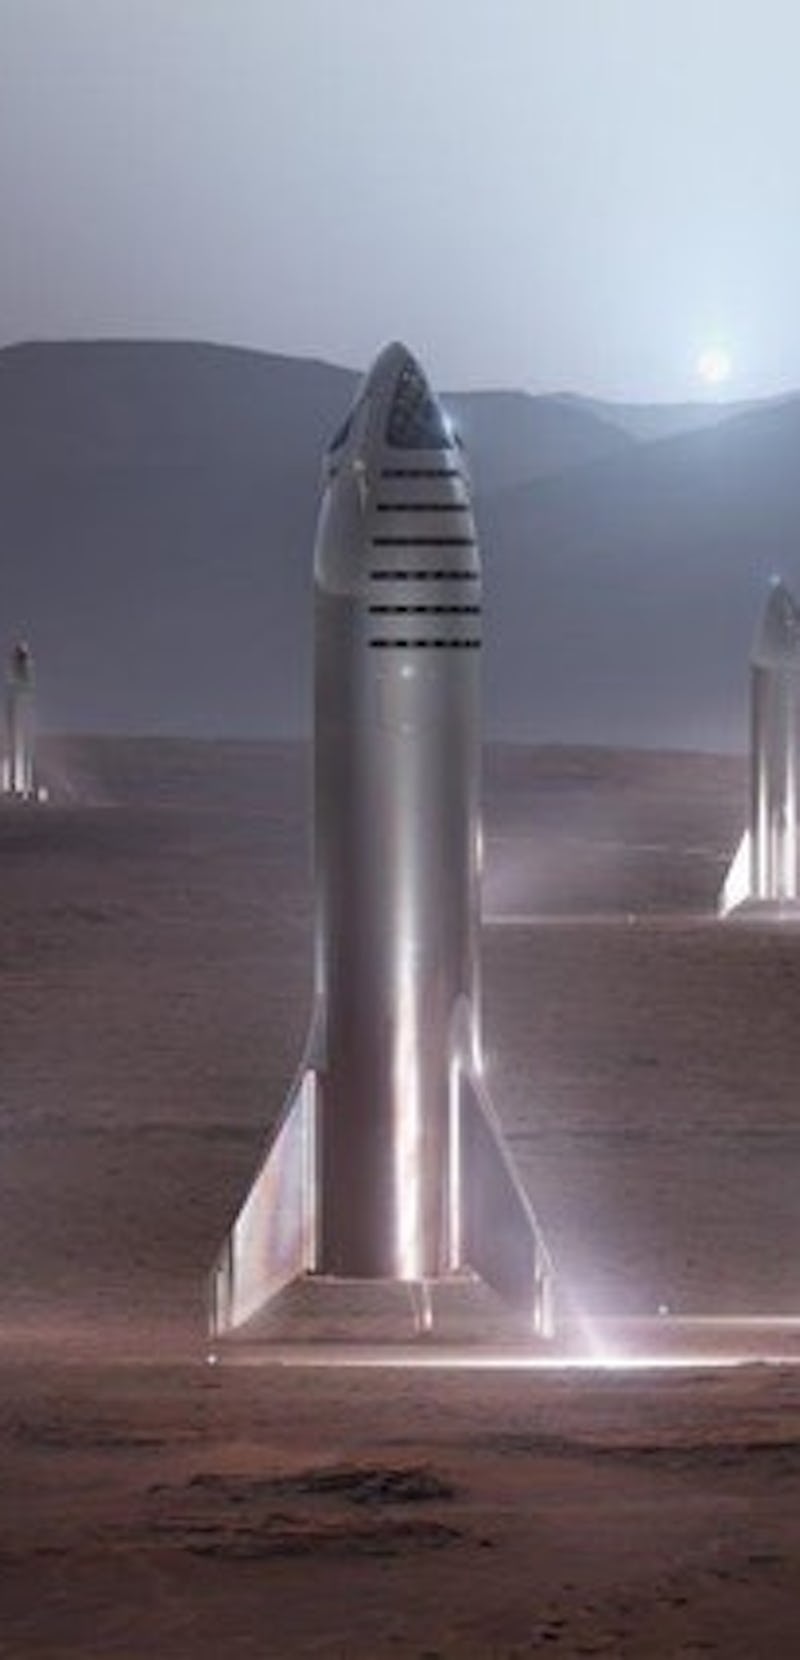 SpaceX SN8 before its launch on December 9